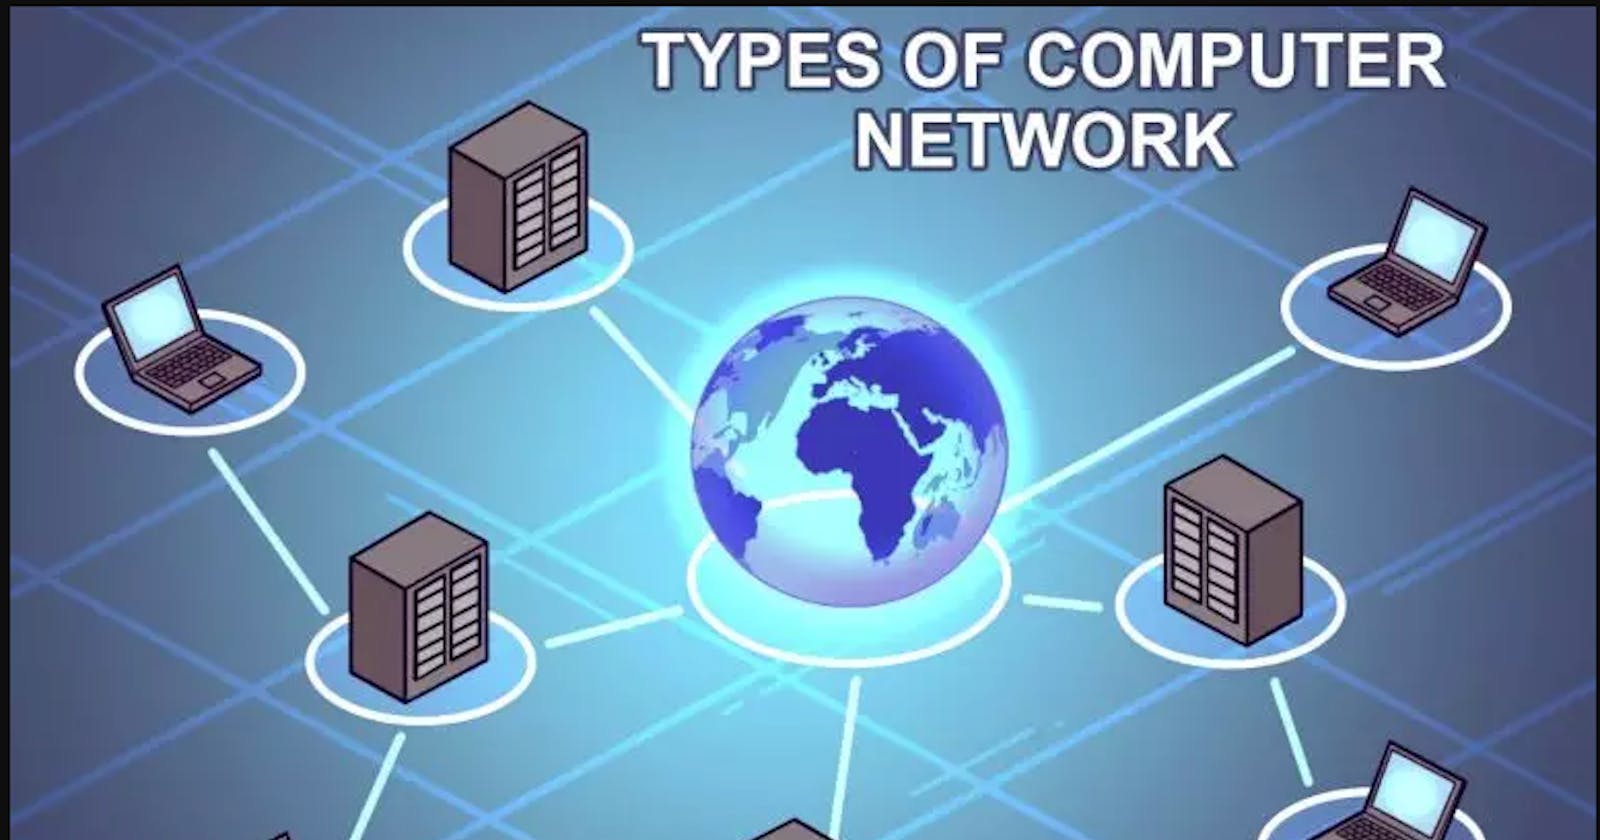 Network Types: Communication in a Connected World